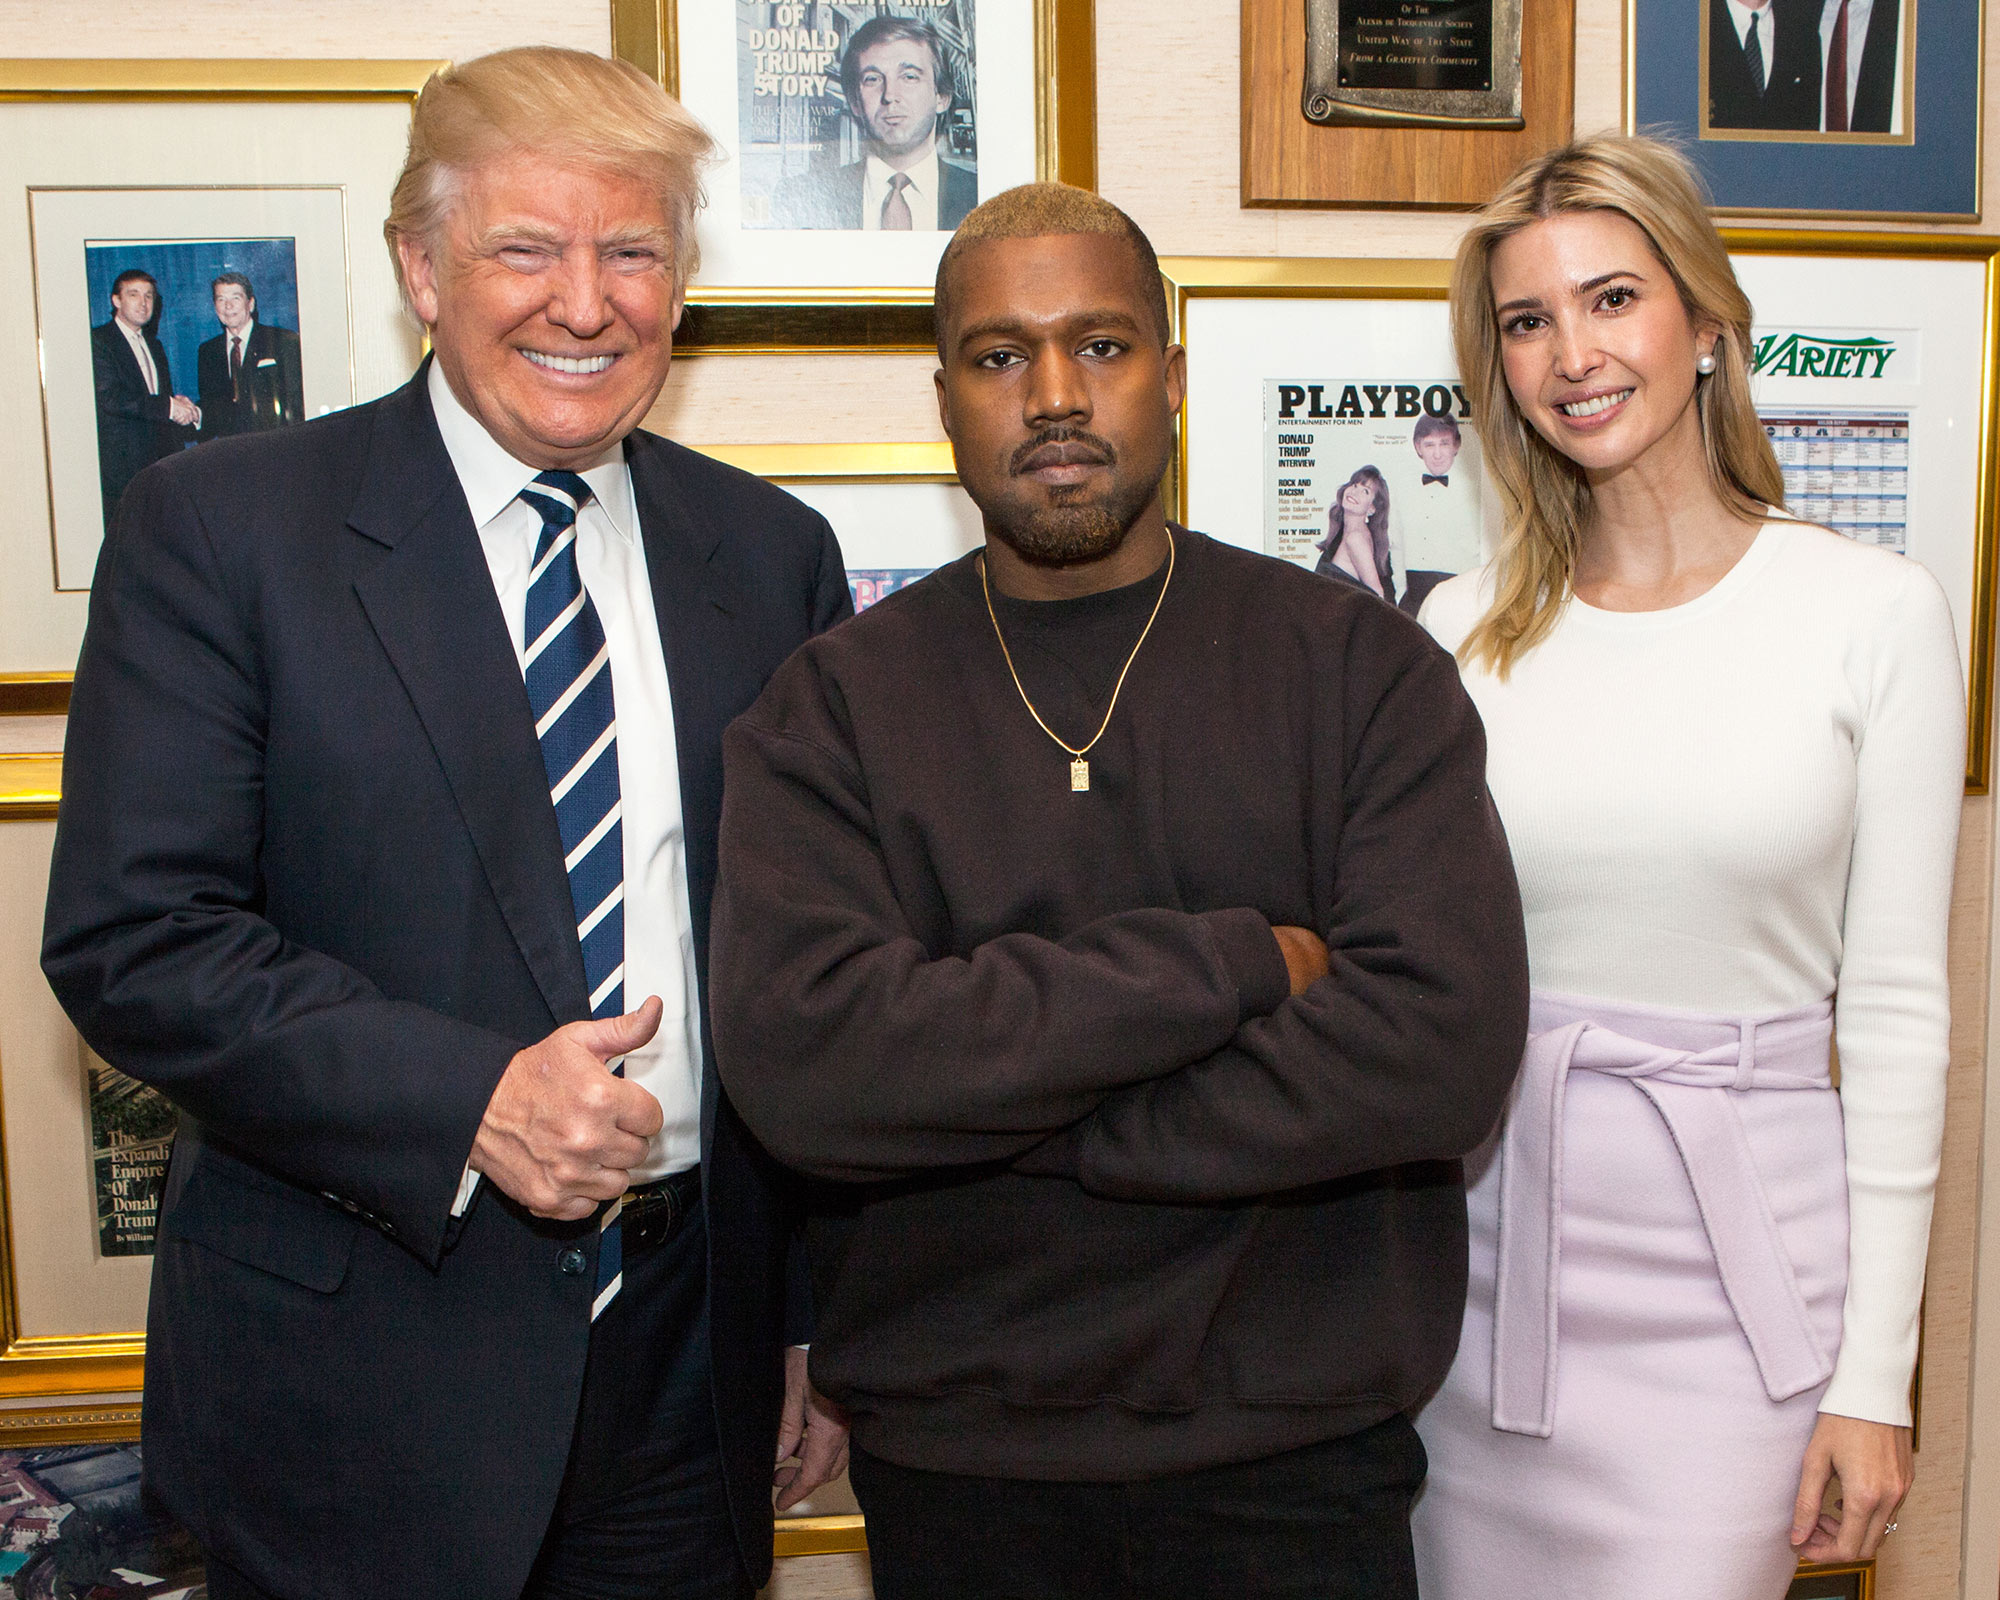 Donald Trump, Kanye West and Ivanka Trump in December 2016